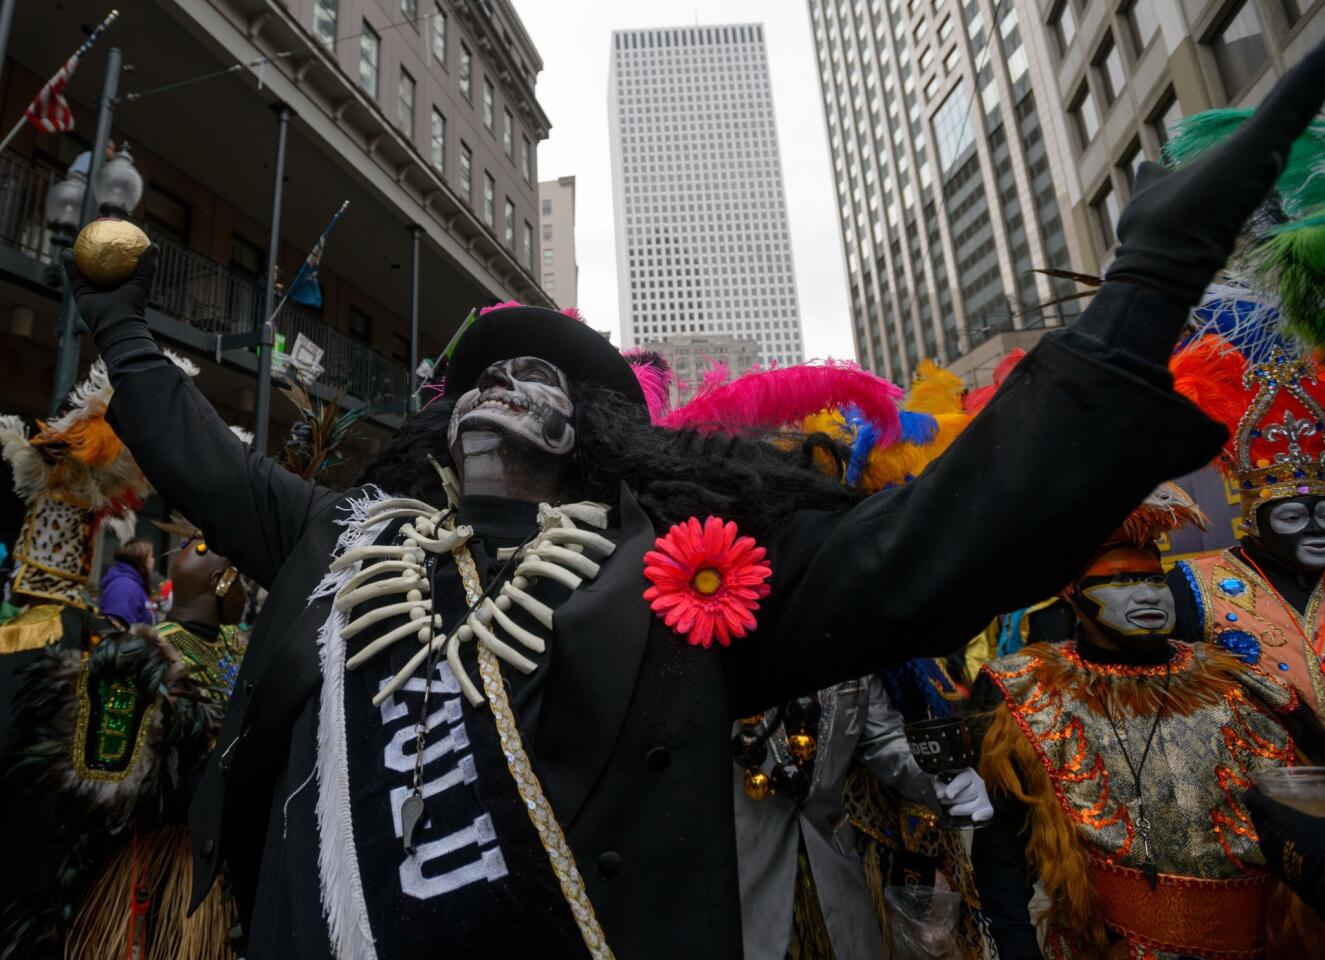 The Krewe of Zulu takes the turn onto Canal Street from St. Charles Avenue during Mardi Gras in New Orleans.